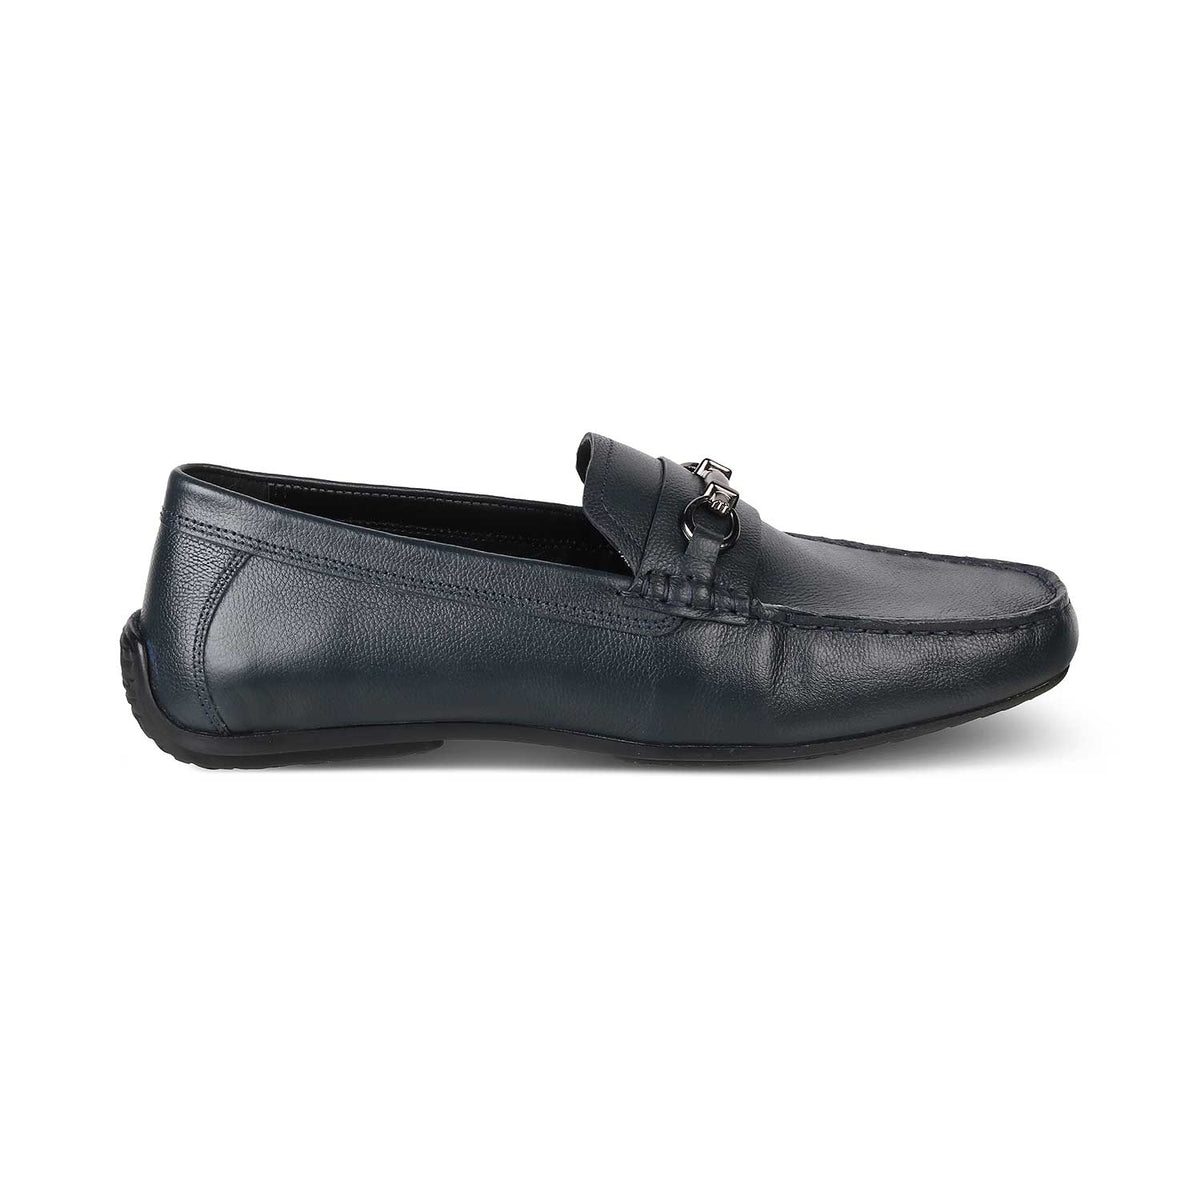 The Sandee Blue Men's Leather Driving Loafers Tresmode - Tresmode